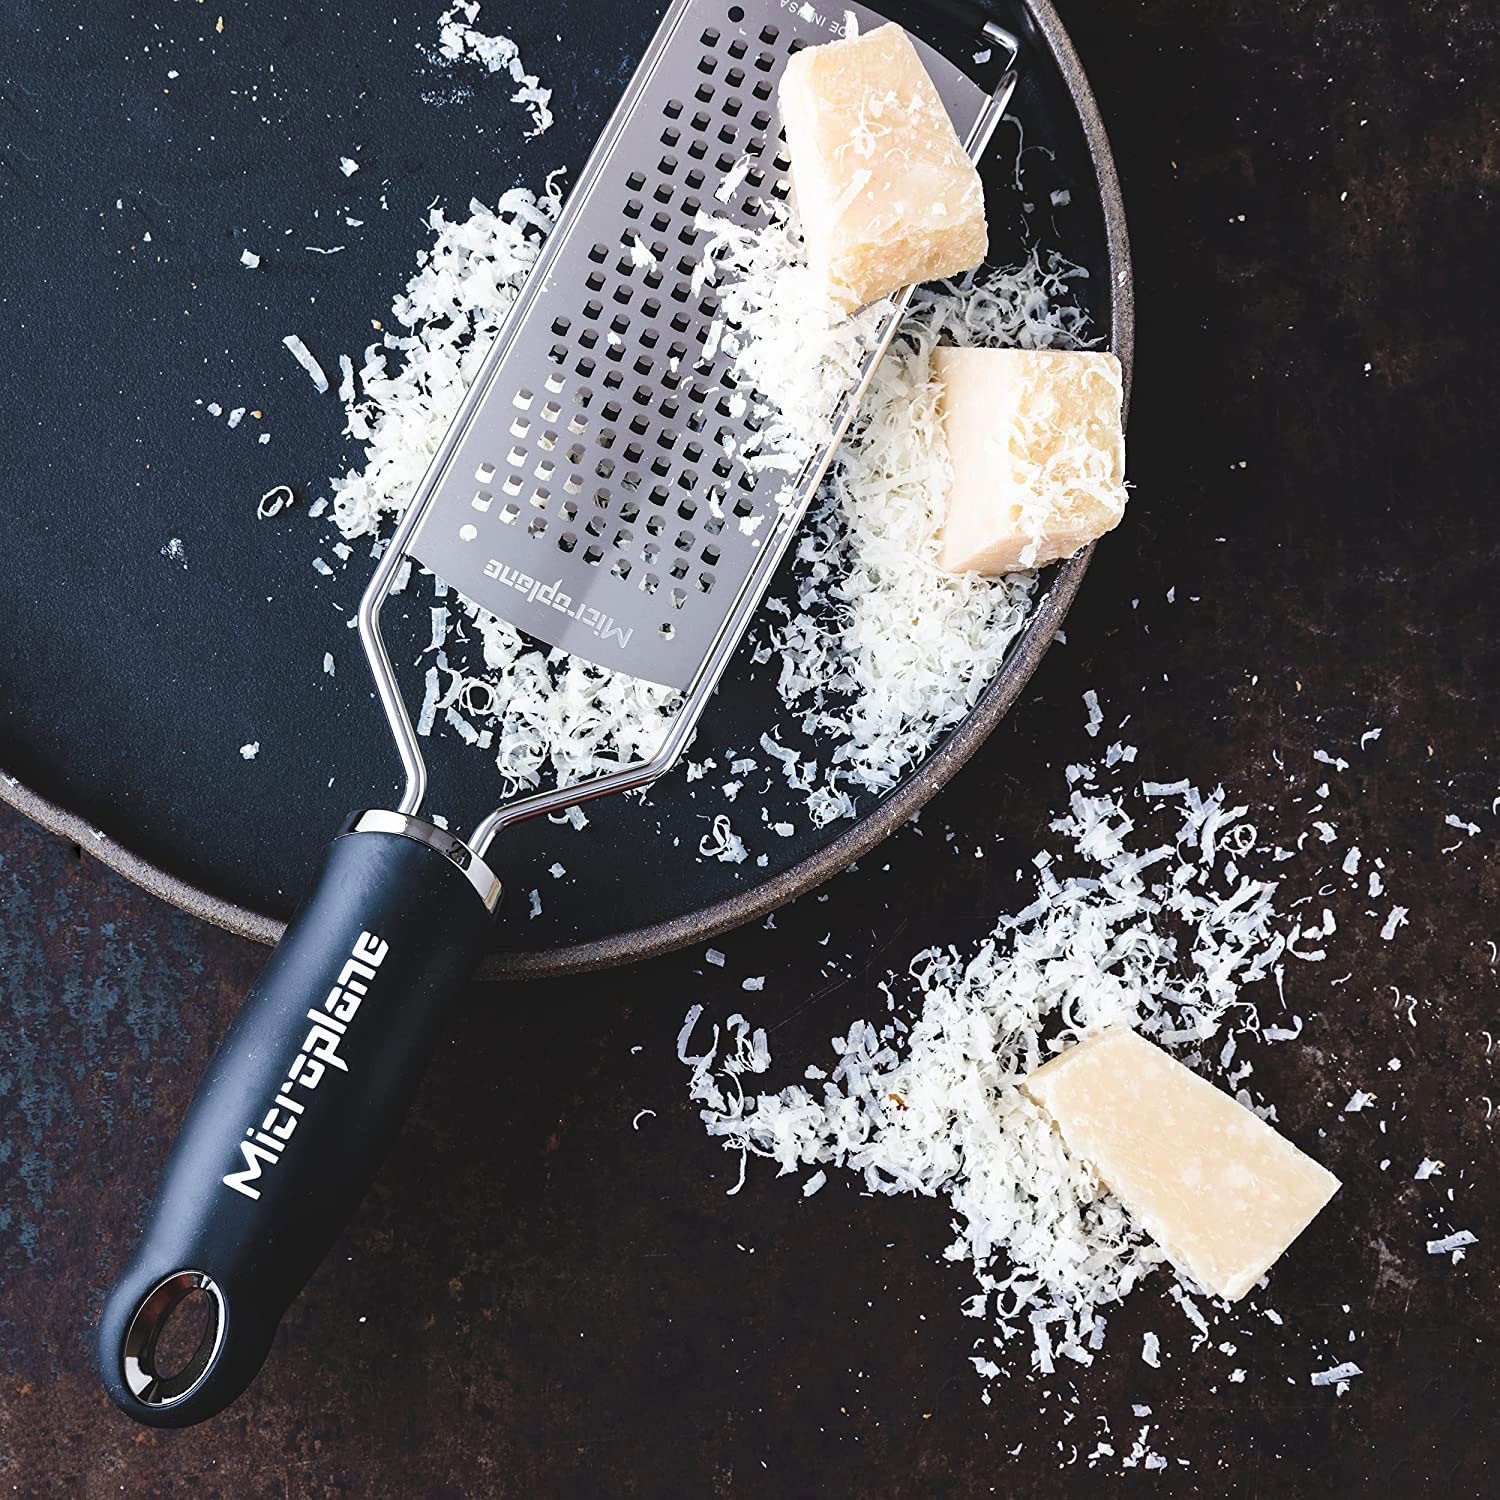 25 Kitchen Essentials for Every Cook in 2023